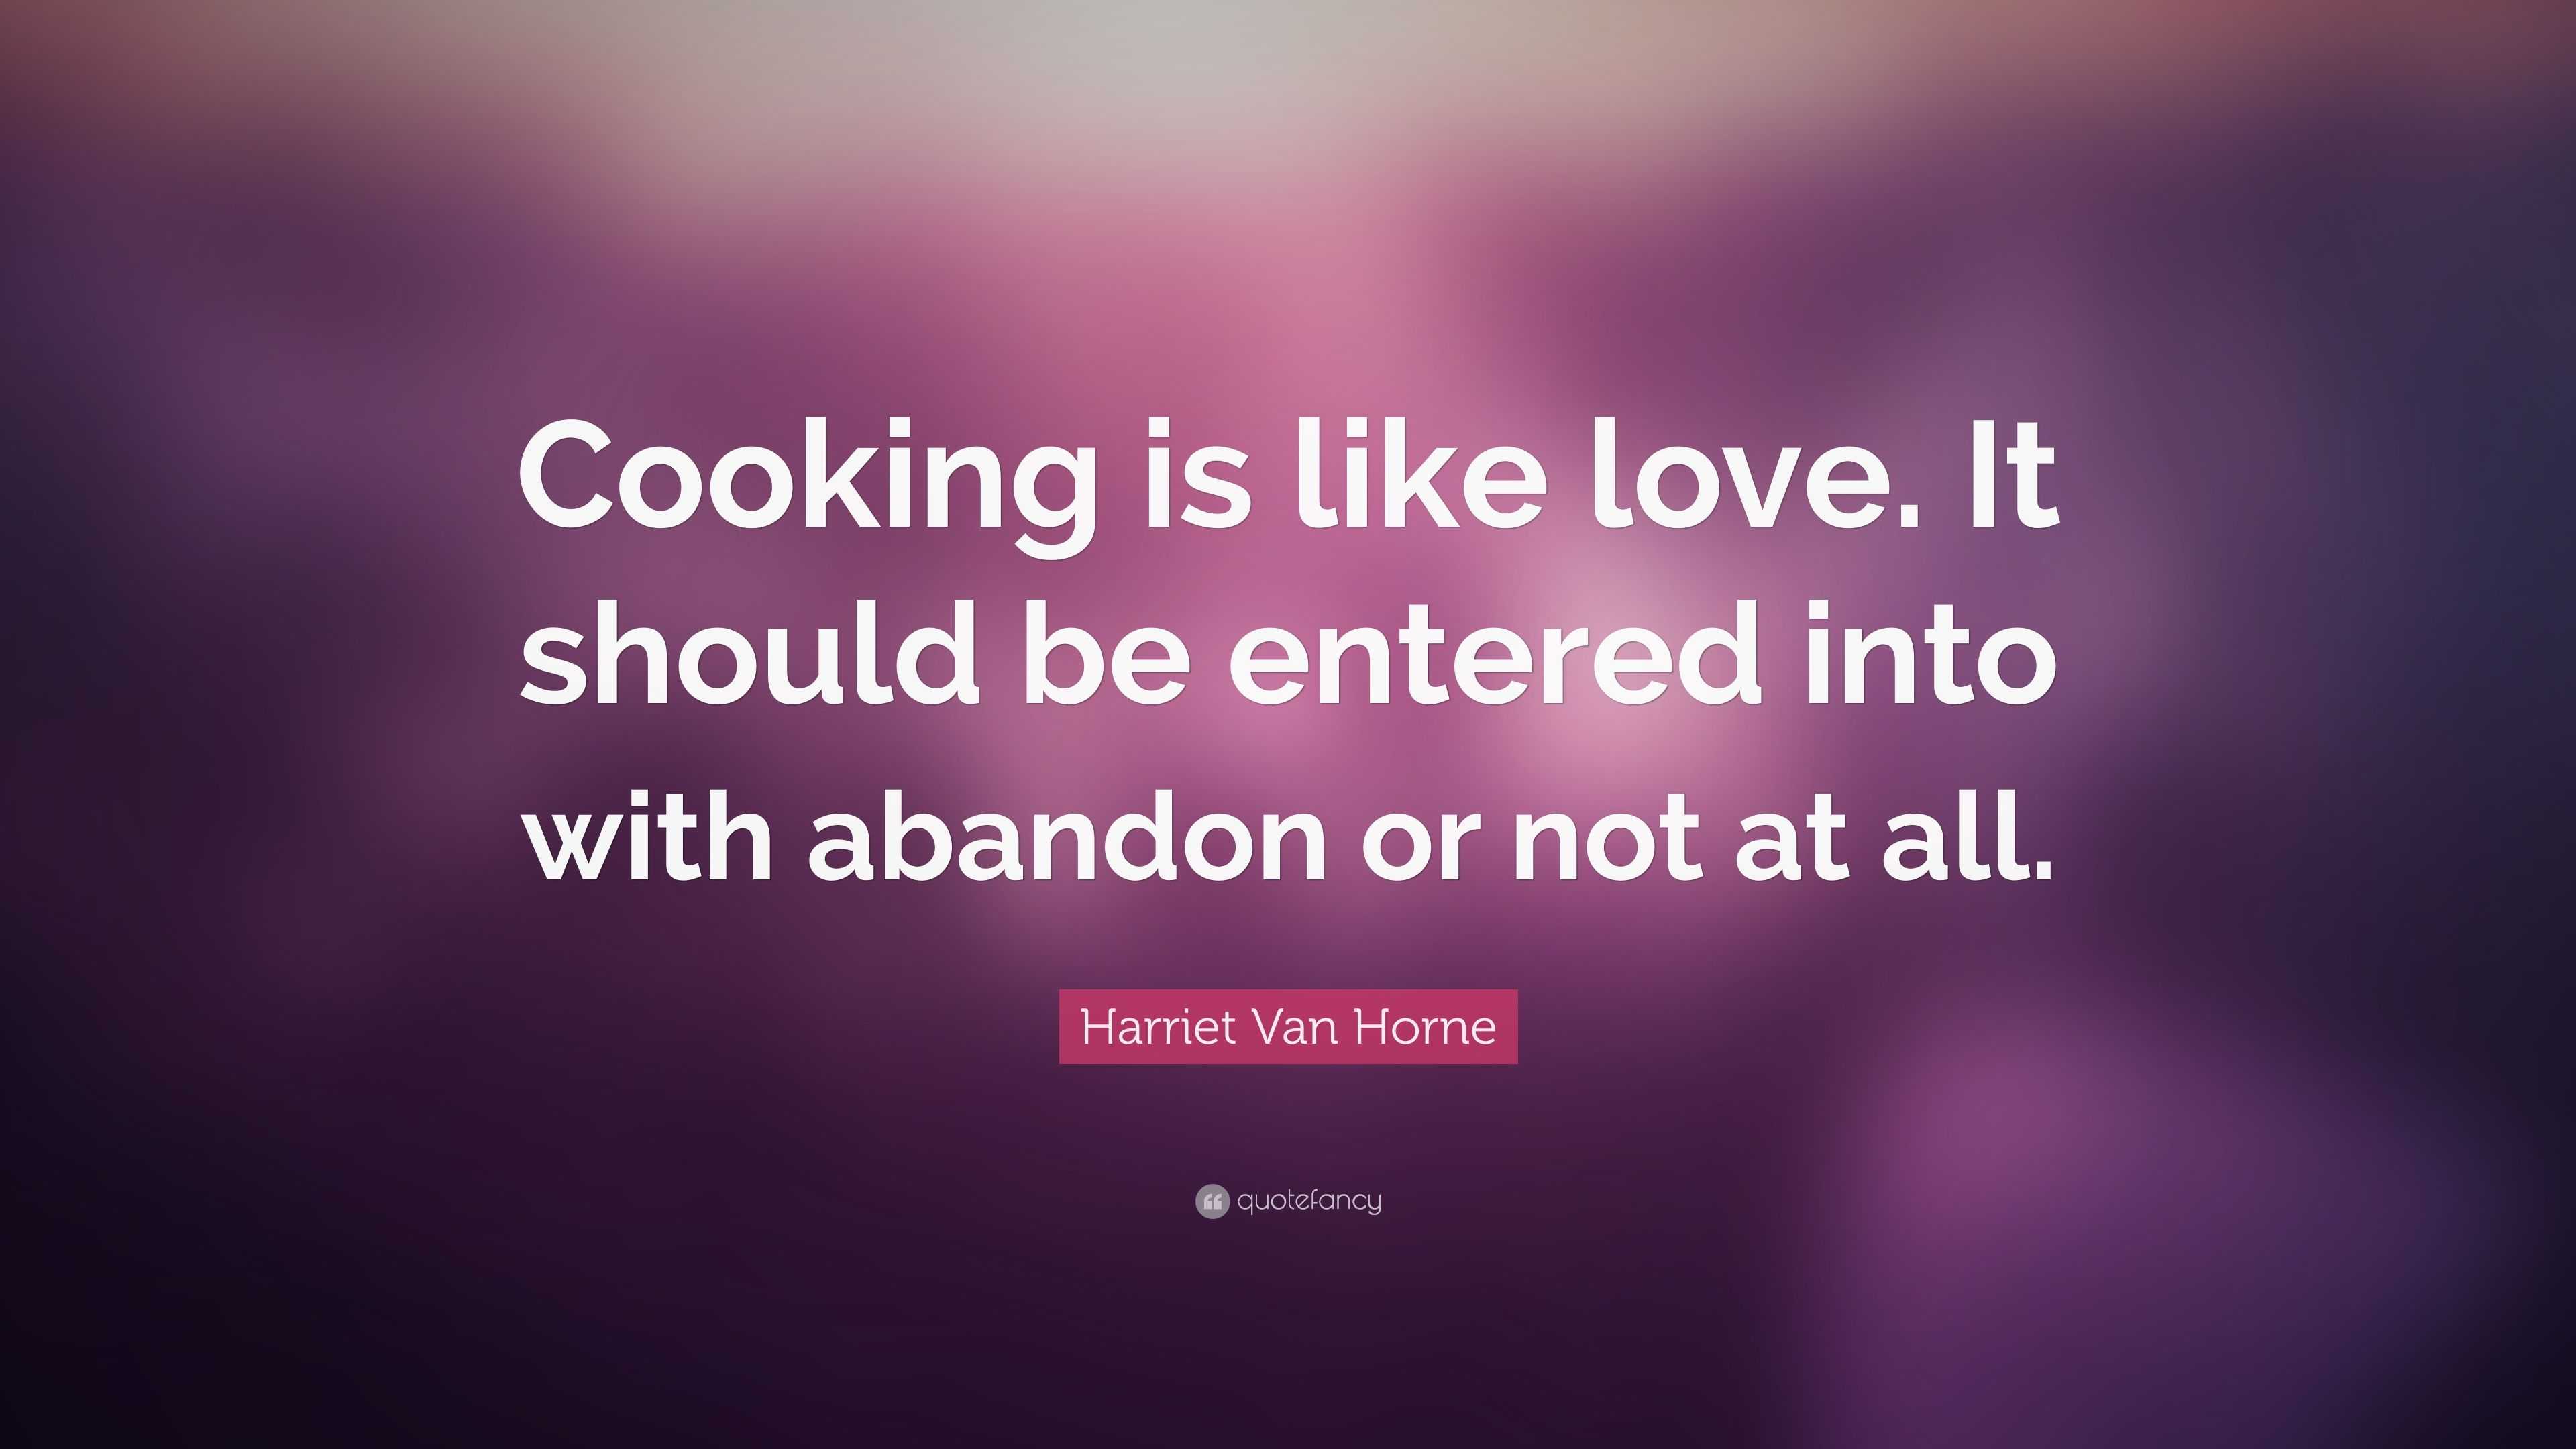 Harriet Van Horne Quote “Cooking is like love It should be entered into